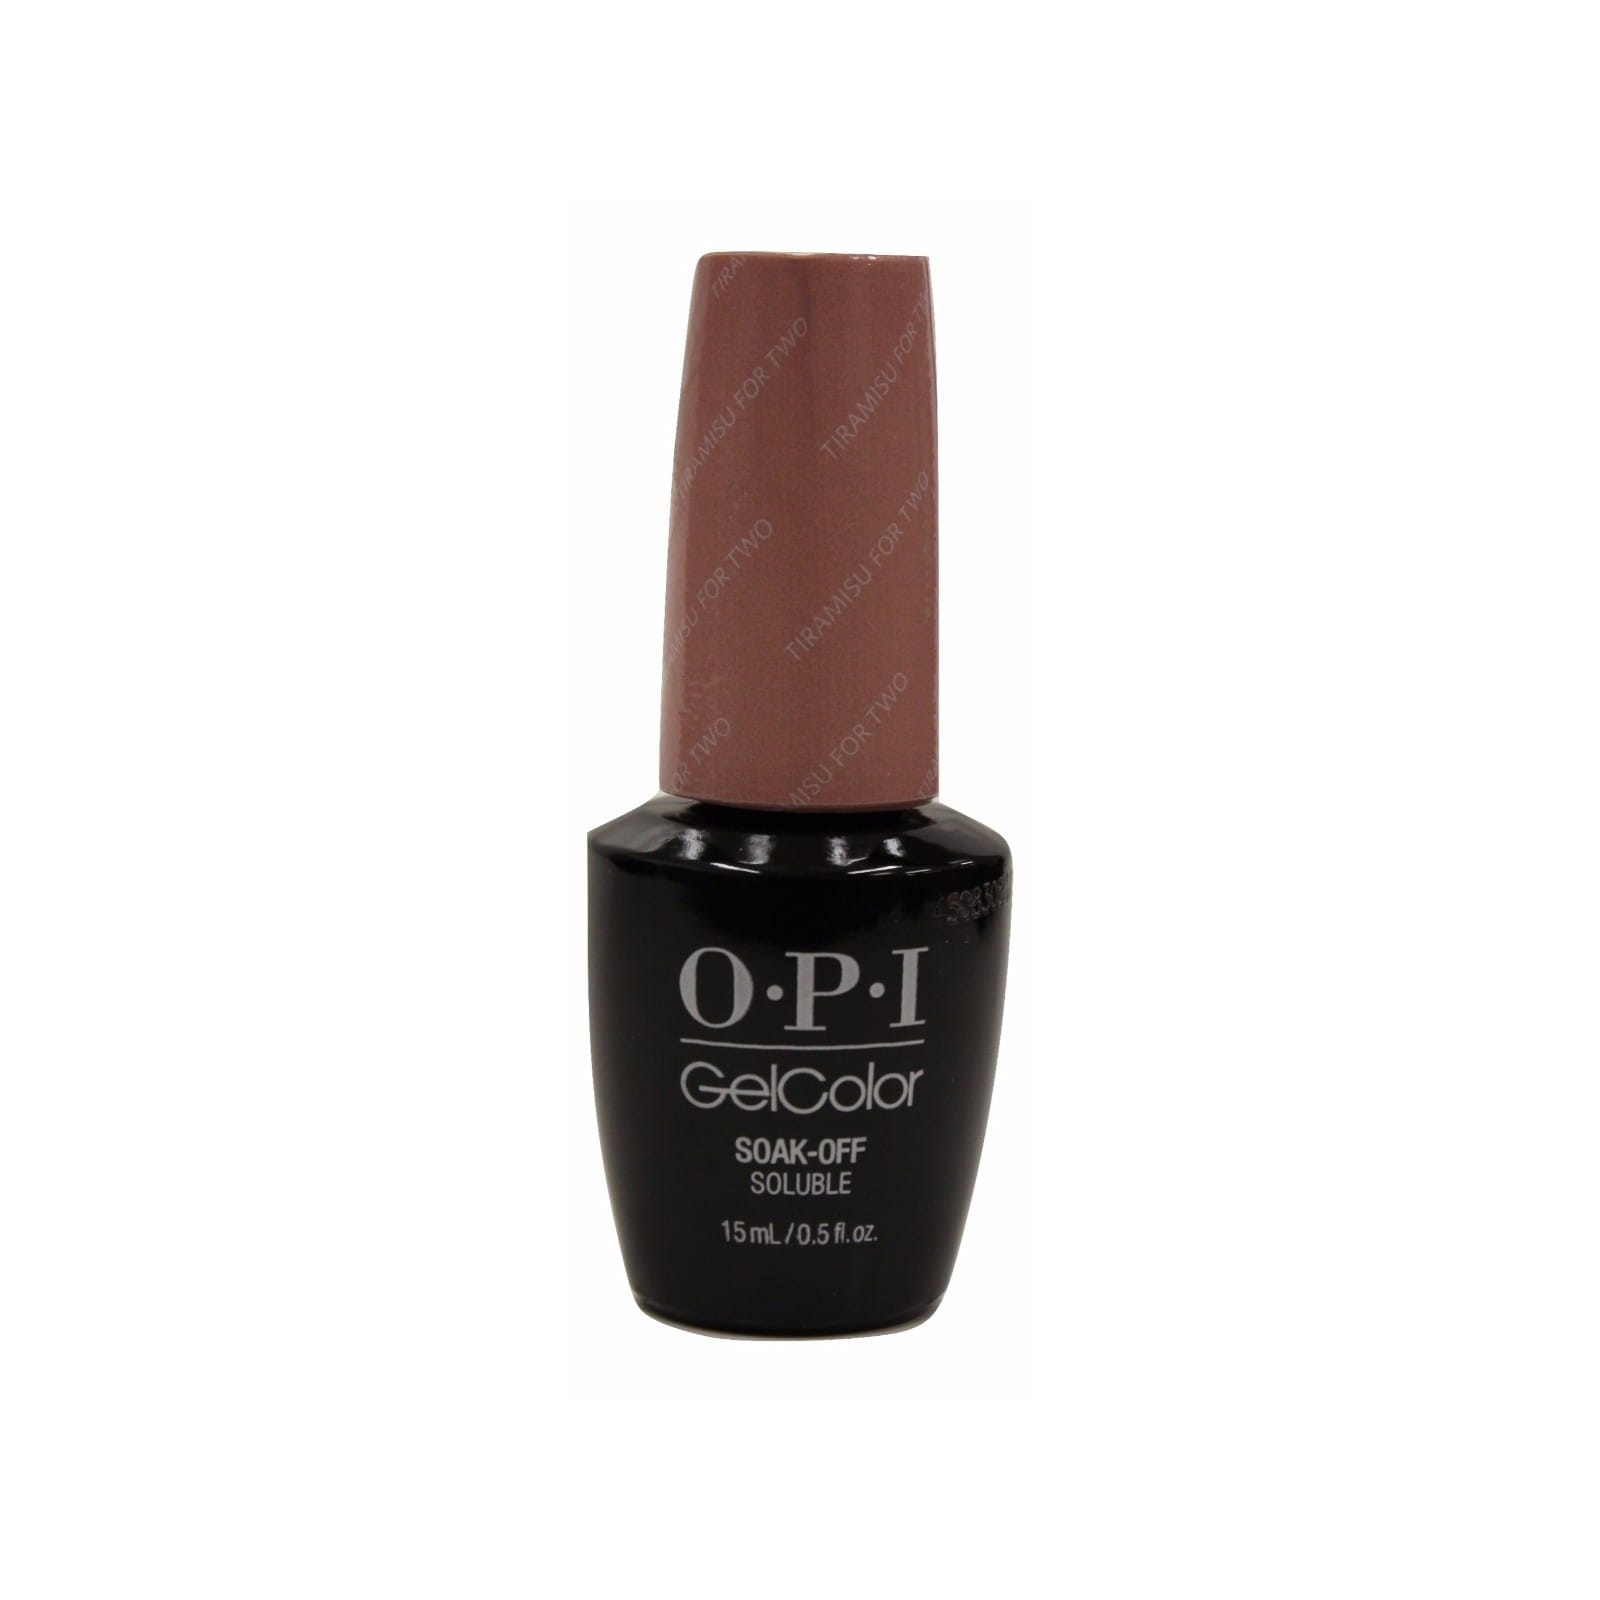 Shop For Opi Gelcolor Tiramisu For Two Get Free Delivery On Everything At Overstock Your Online Beauty Products Shop Get 5 In Rewards With Club O